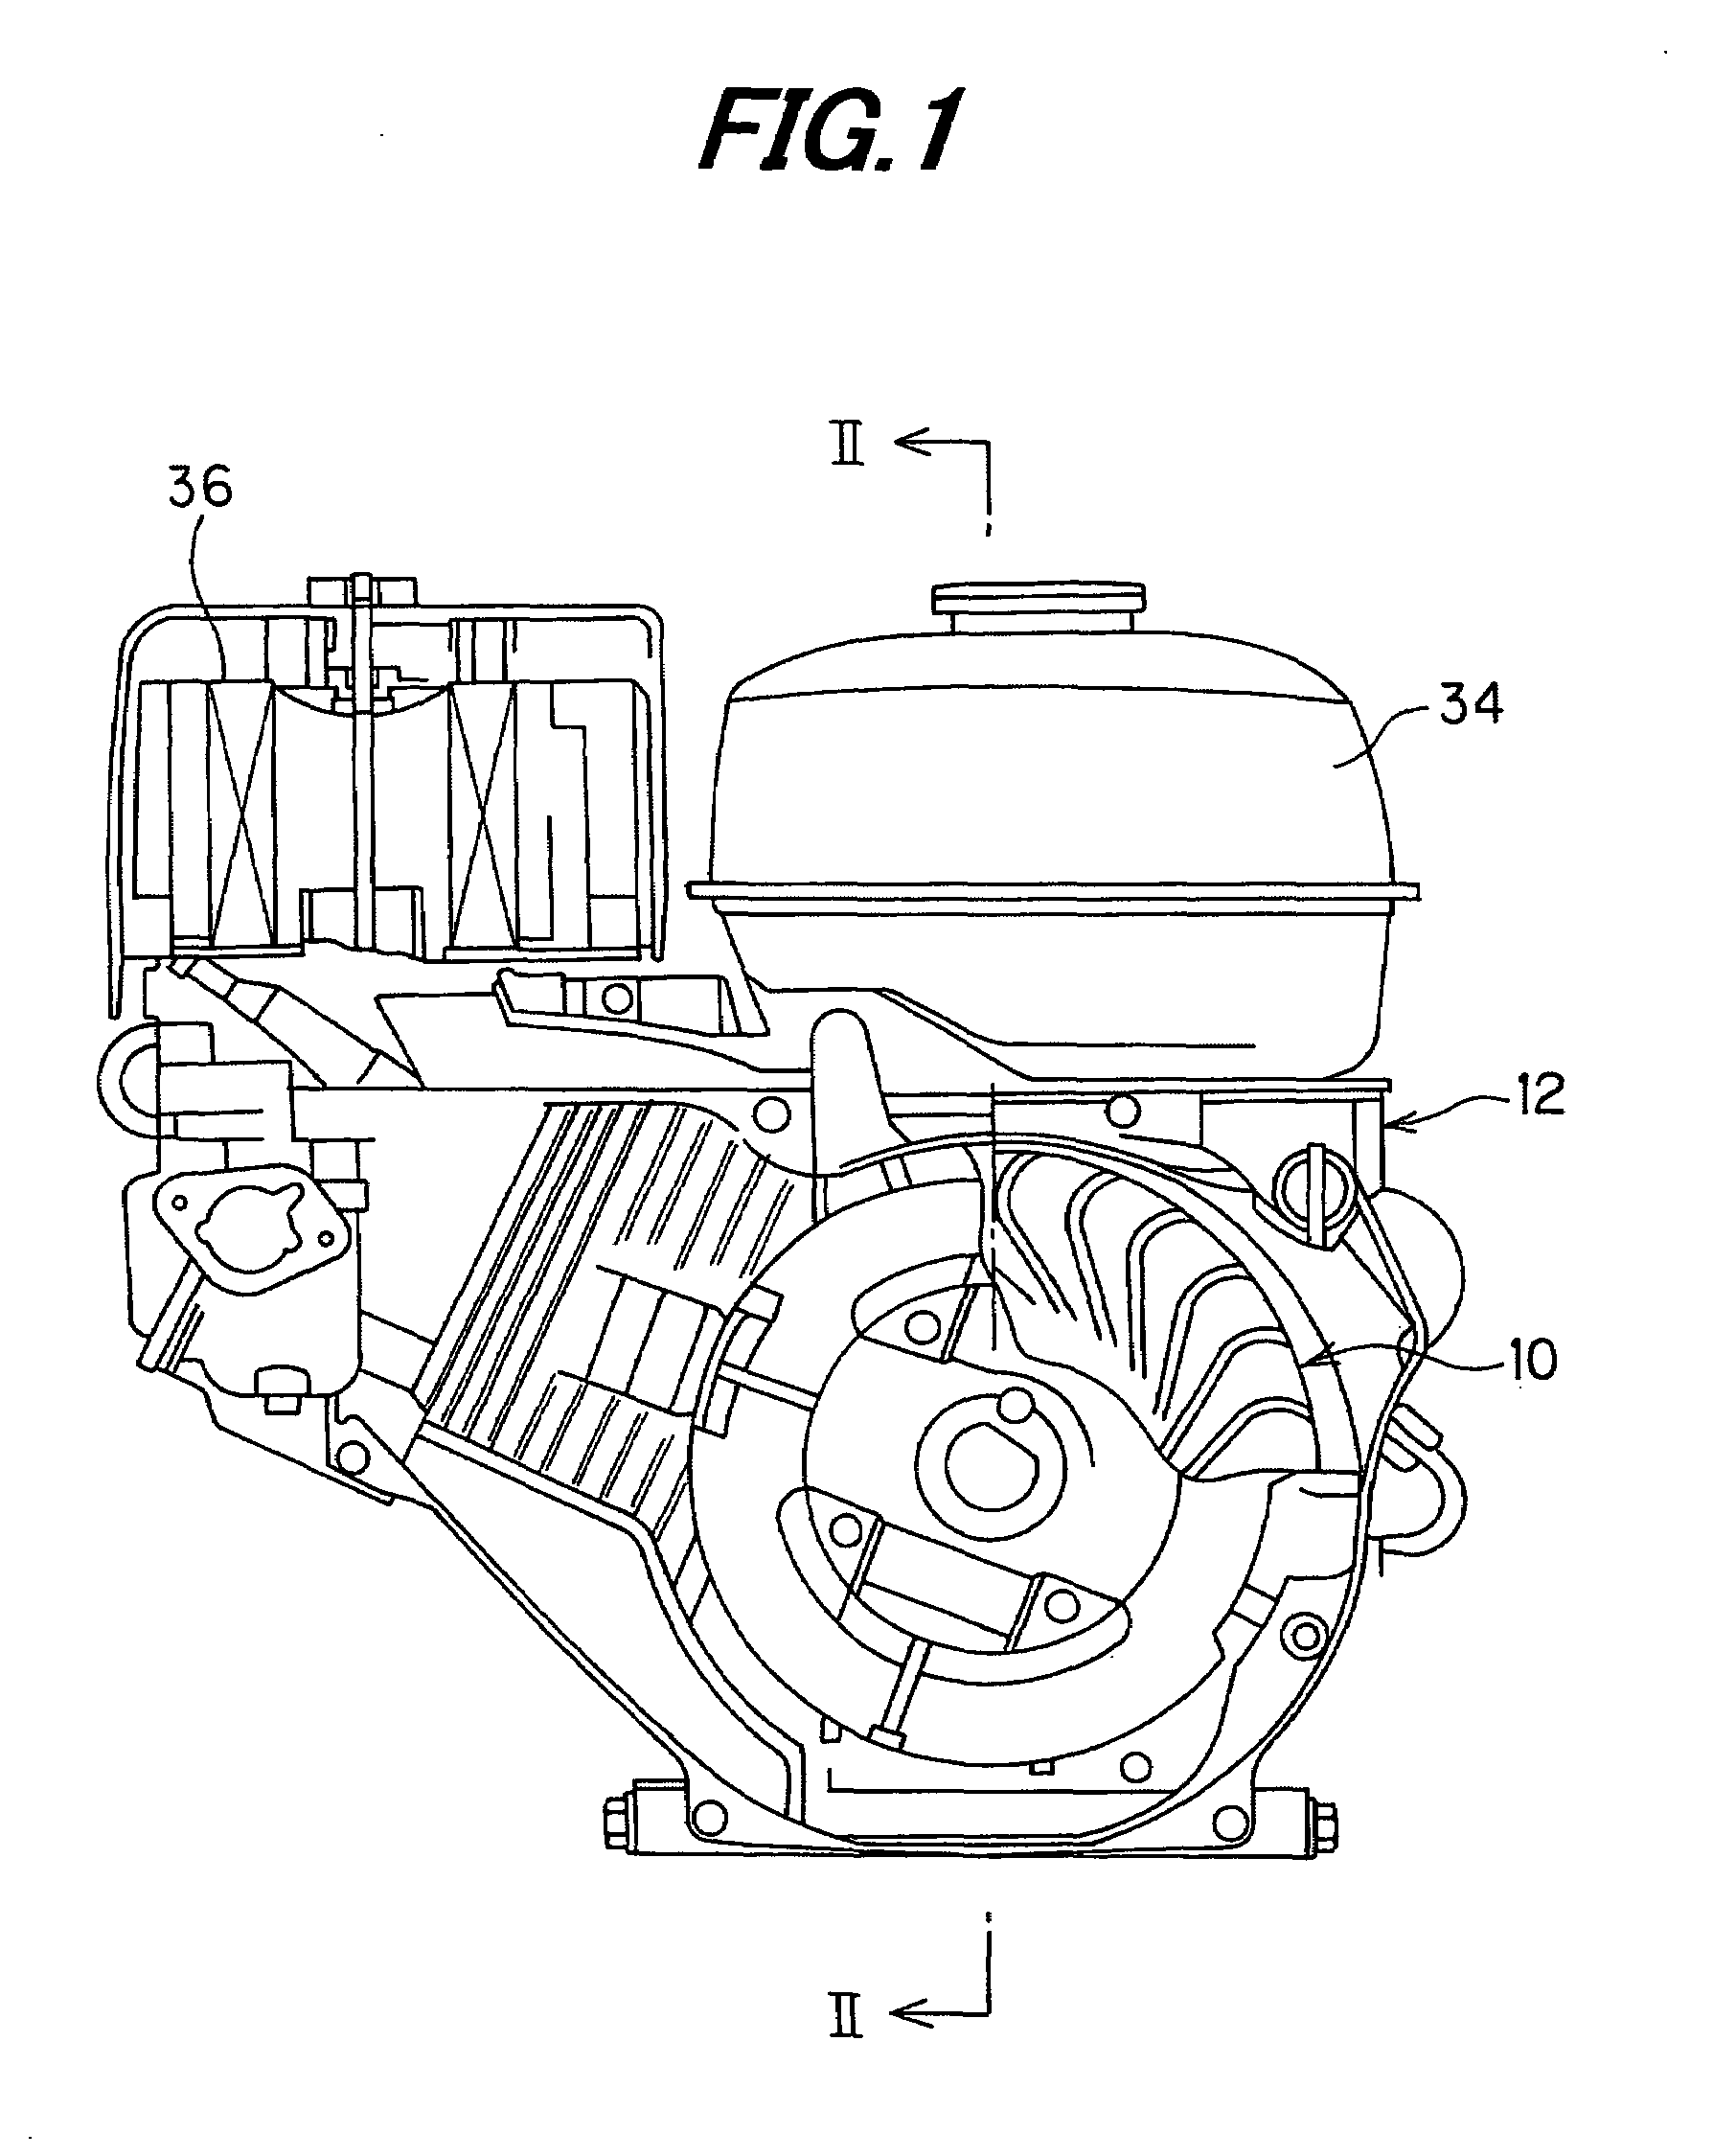 Multi-blade fan for air-cooled engine